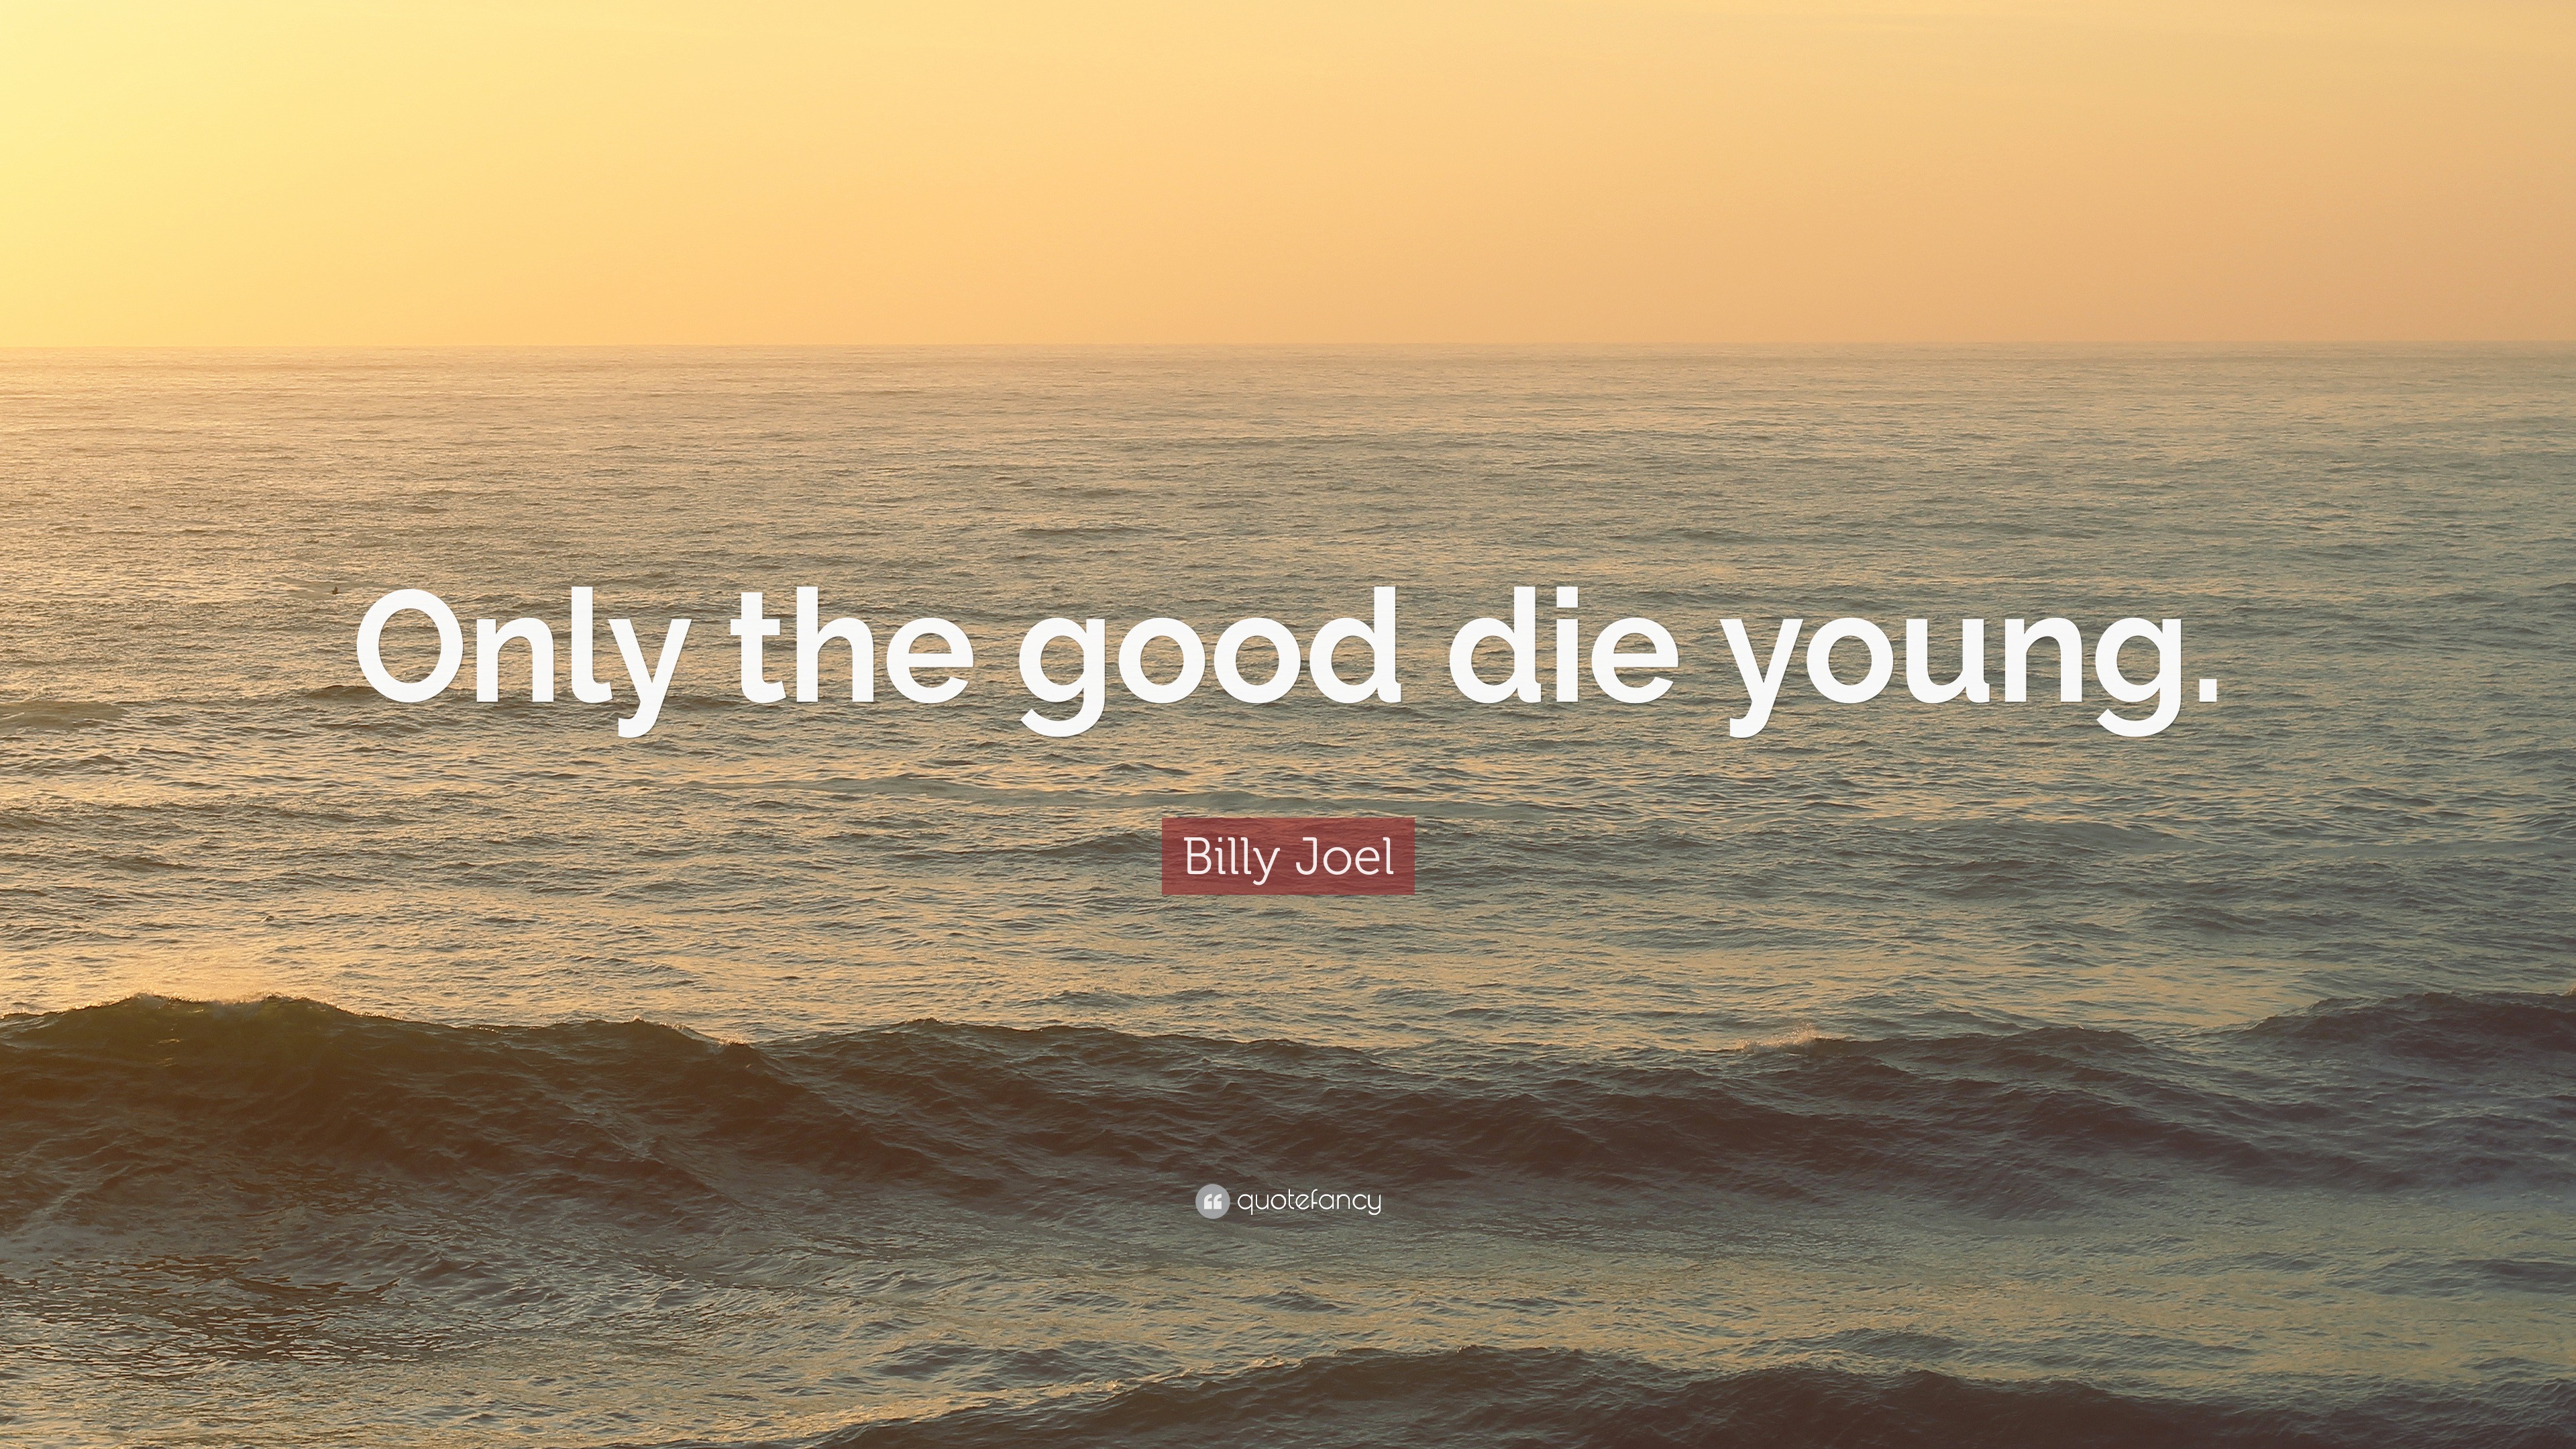 Billy Joel Quote: "Only the good die young." (12 wallpapers) - Quotefancy